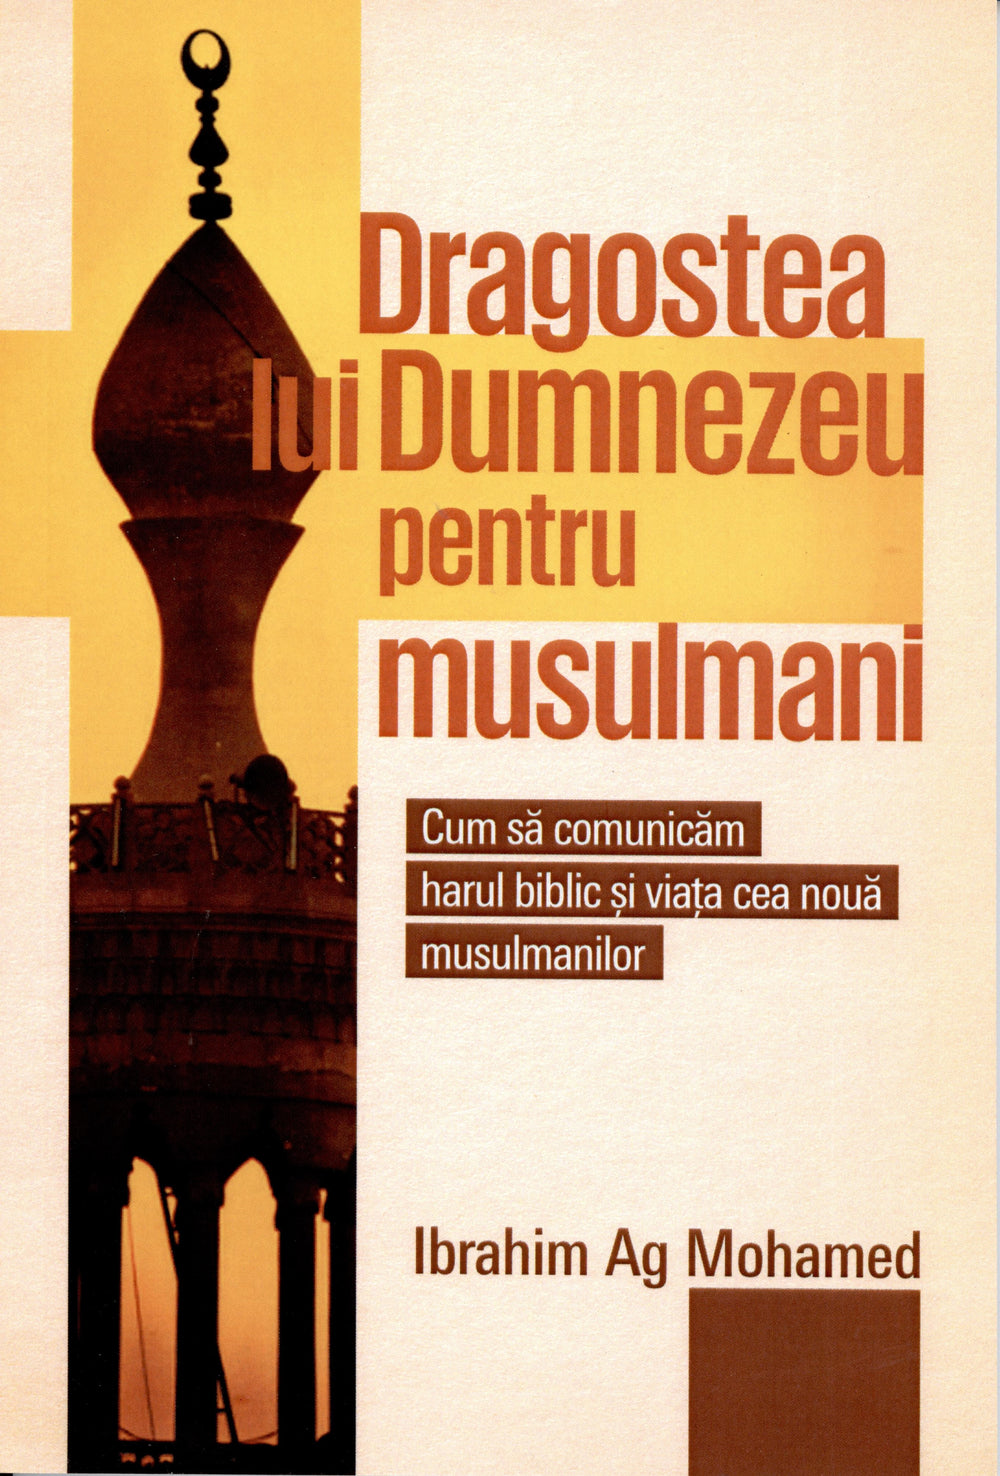 Romanian God's Love for Muslims